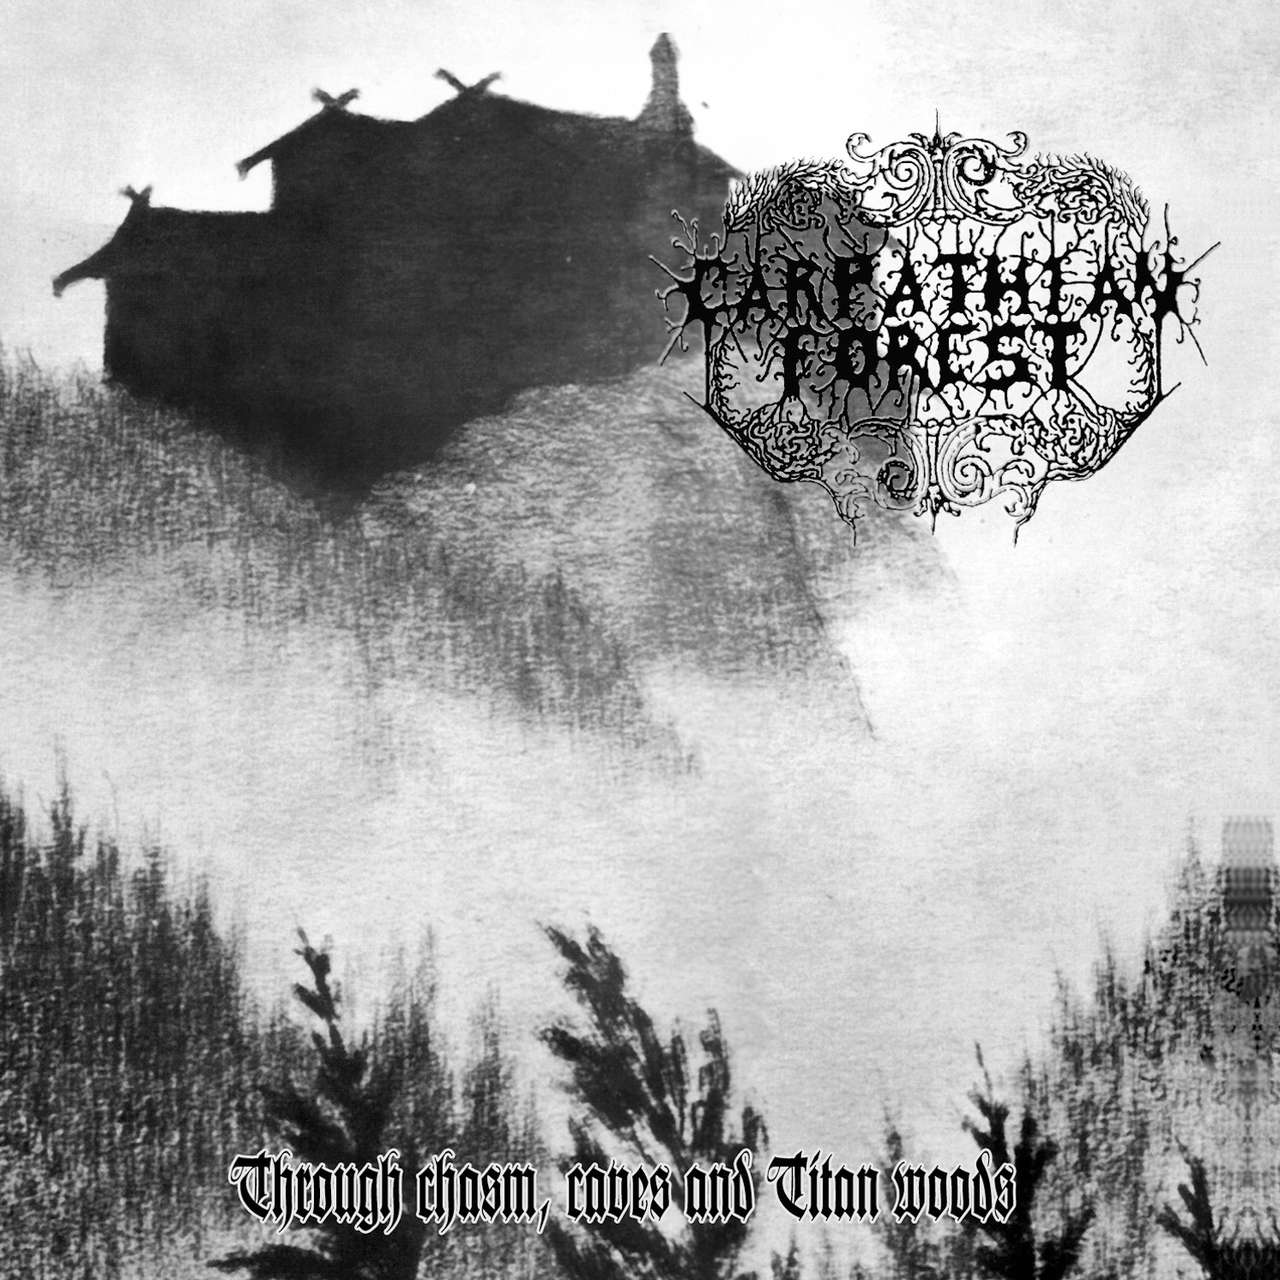 Carpathian Forest - Through Chasm, Caves and Titan Woods (2013 Reissue) (LP)